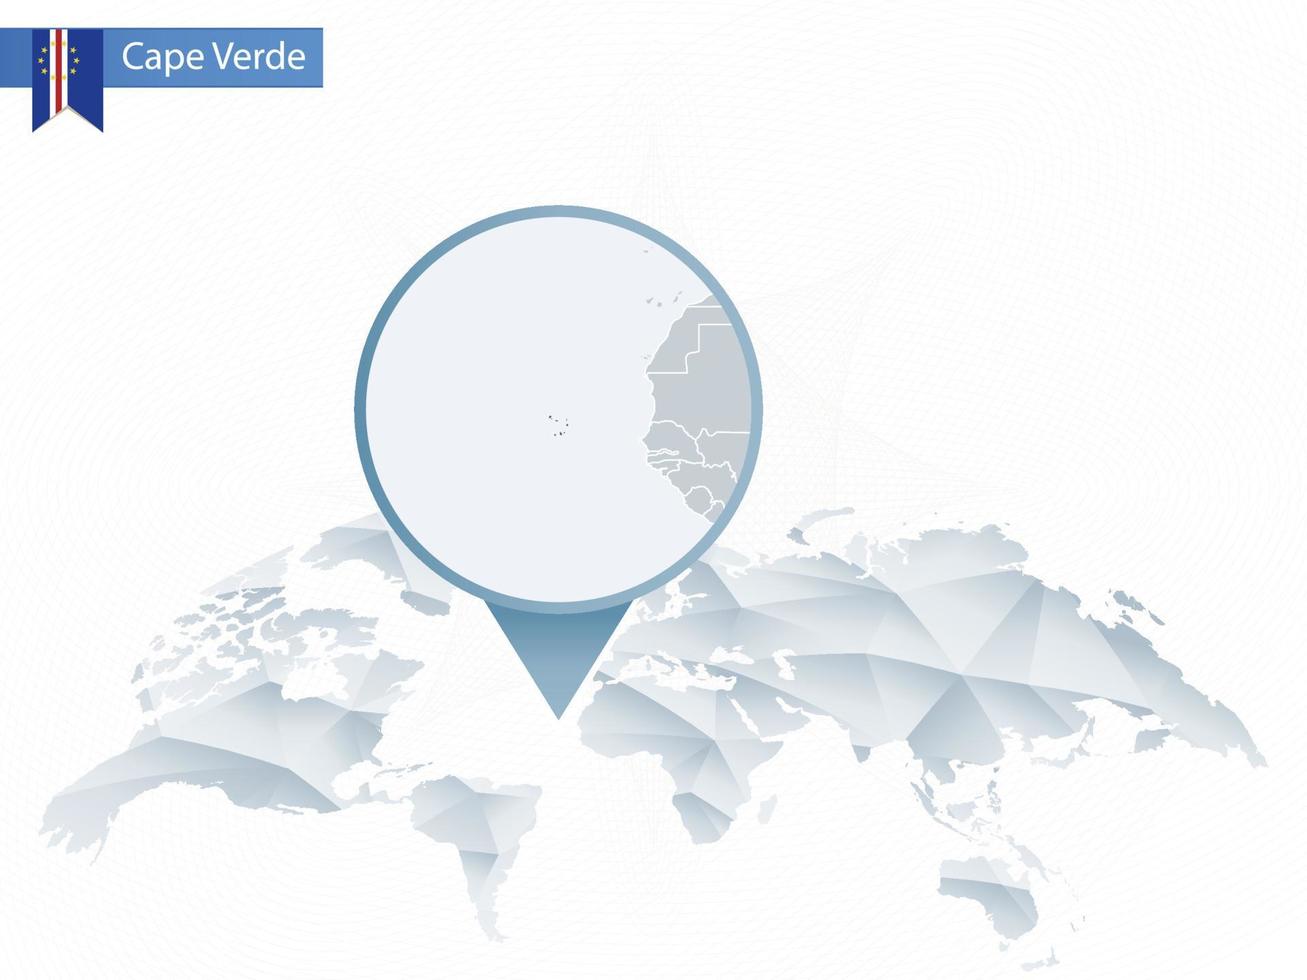 Abstract rounded World Map with pinned detailed Cape Verde map. vector